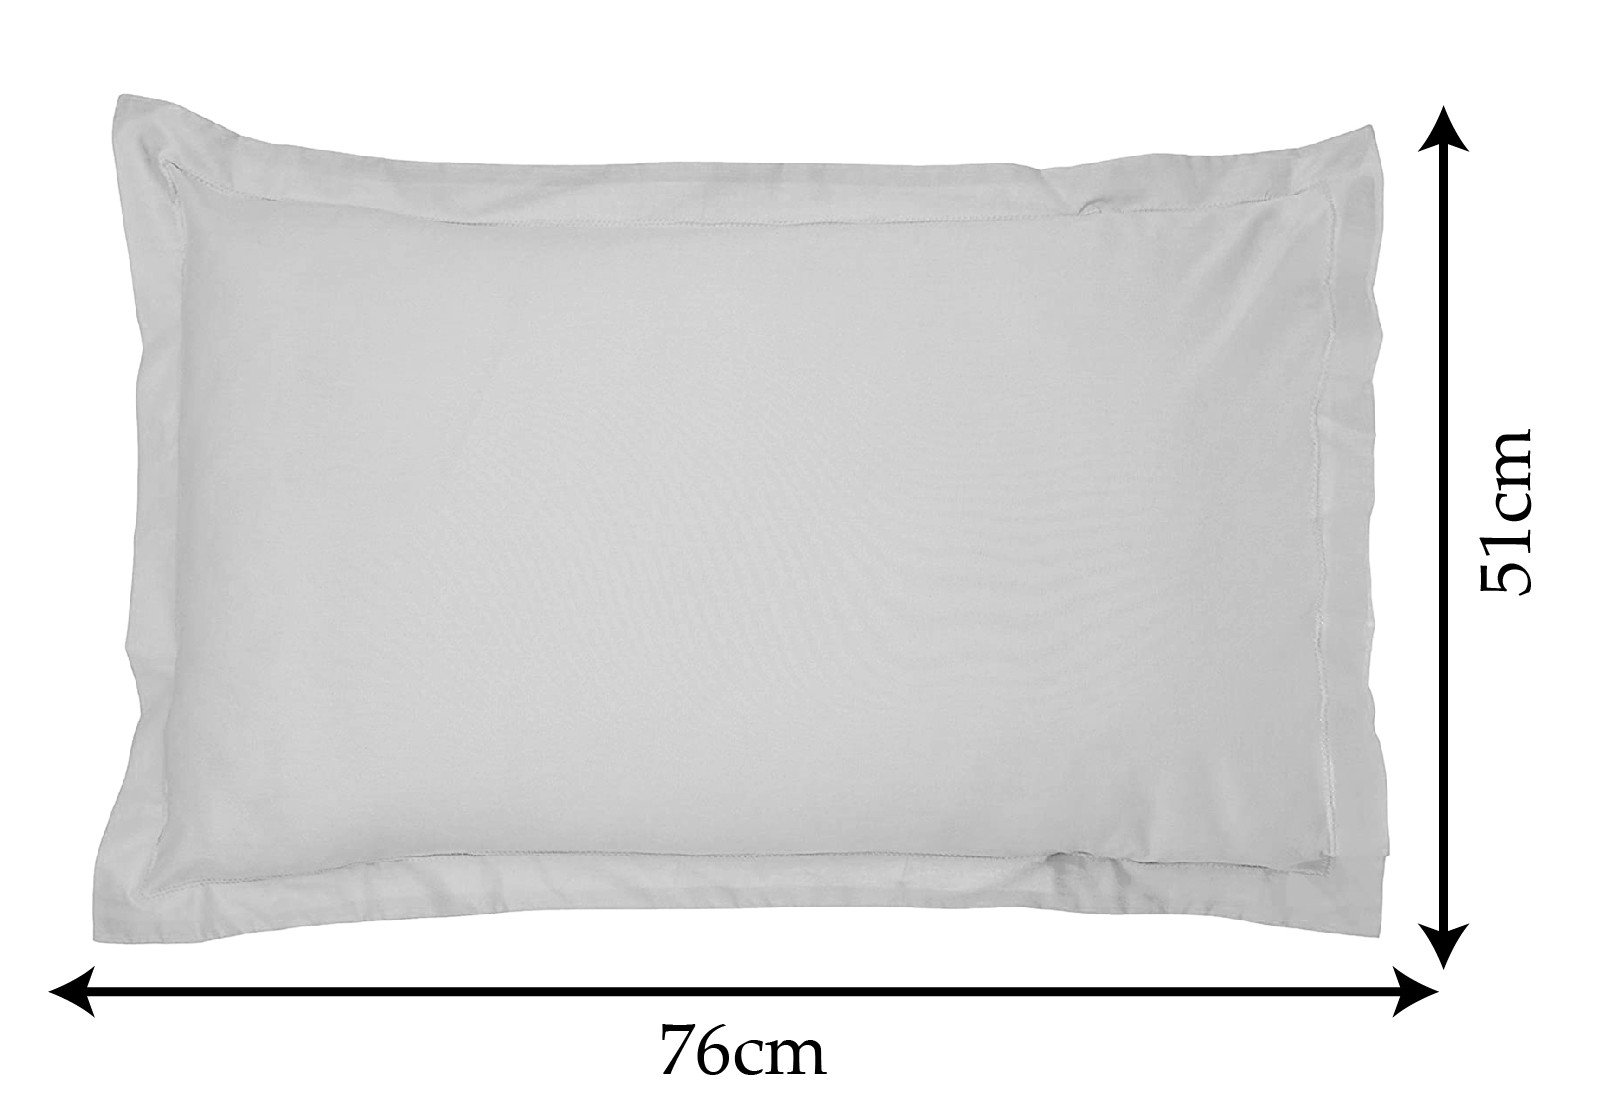 Kuber Industries Breathable & Soft Cotton Pillow Cover For Sofa, Couch, Bed - 29x20 Inch,(White)